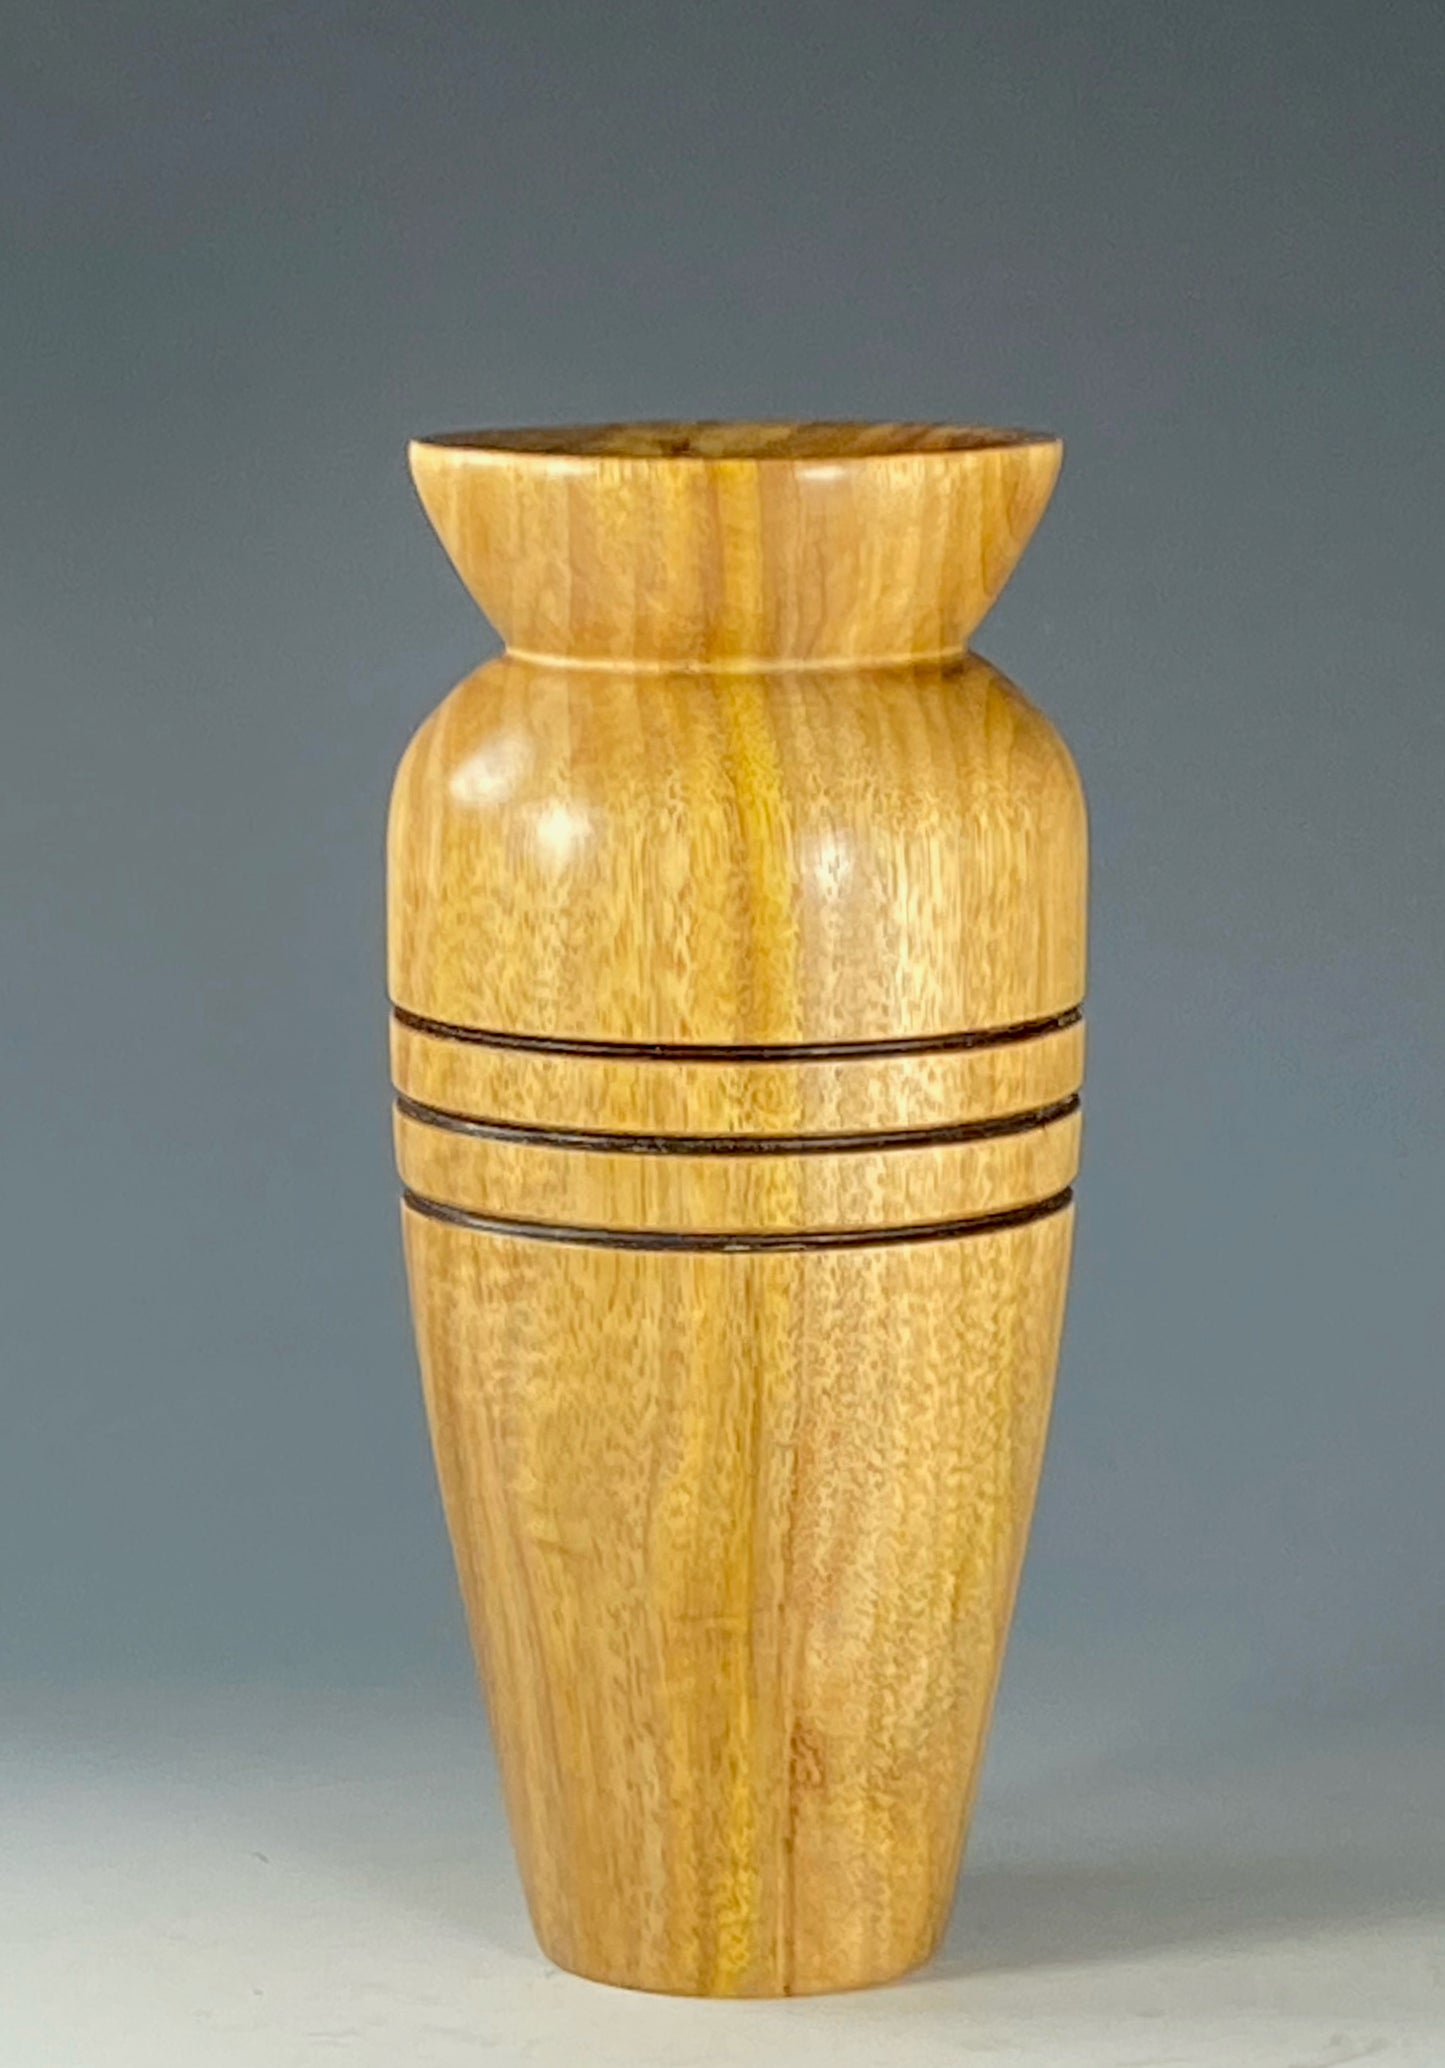 TWIG VASE TURNED FROM CANARYWOOD